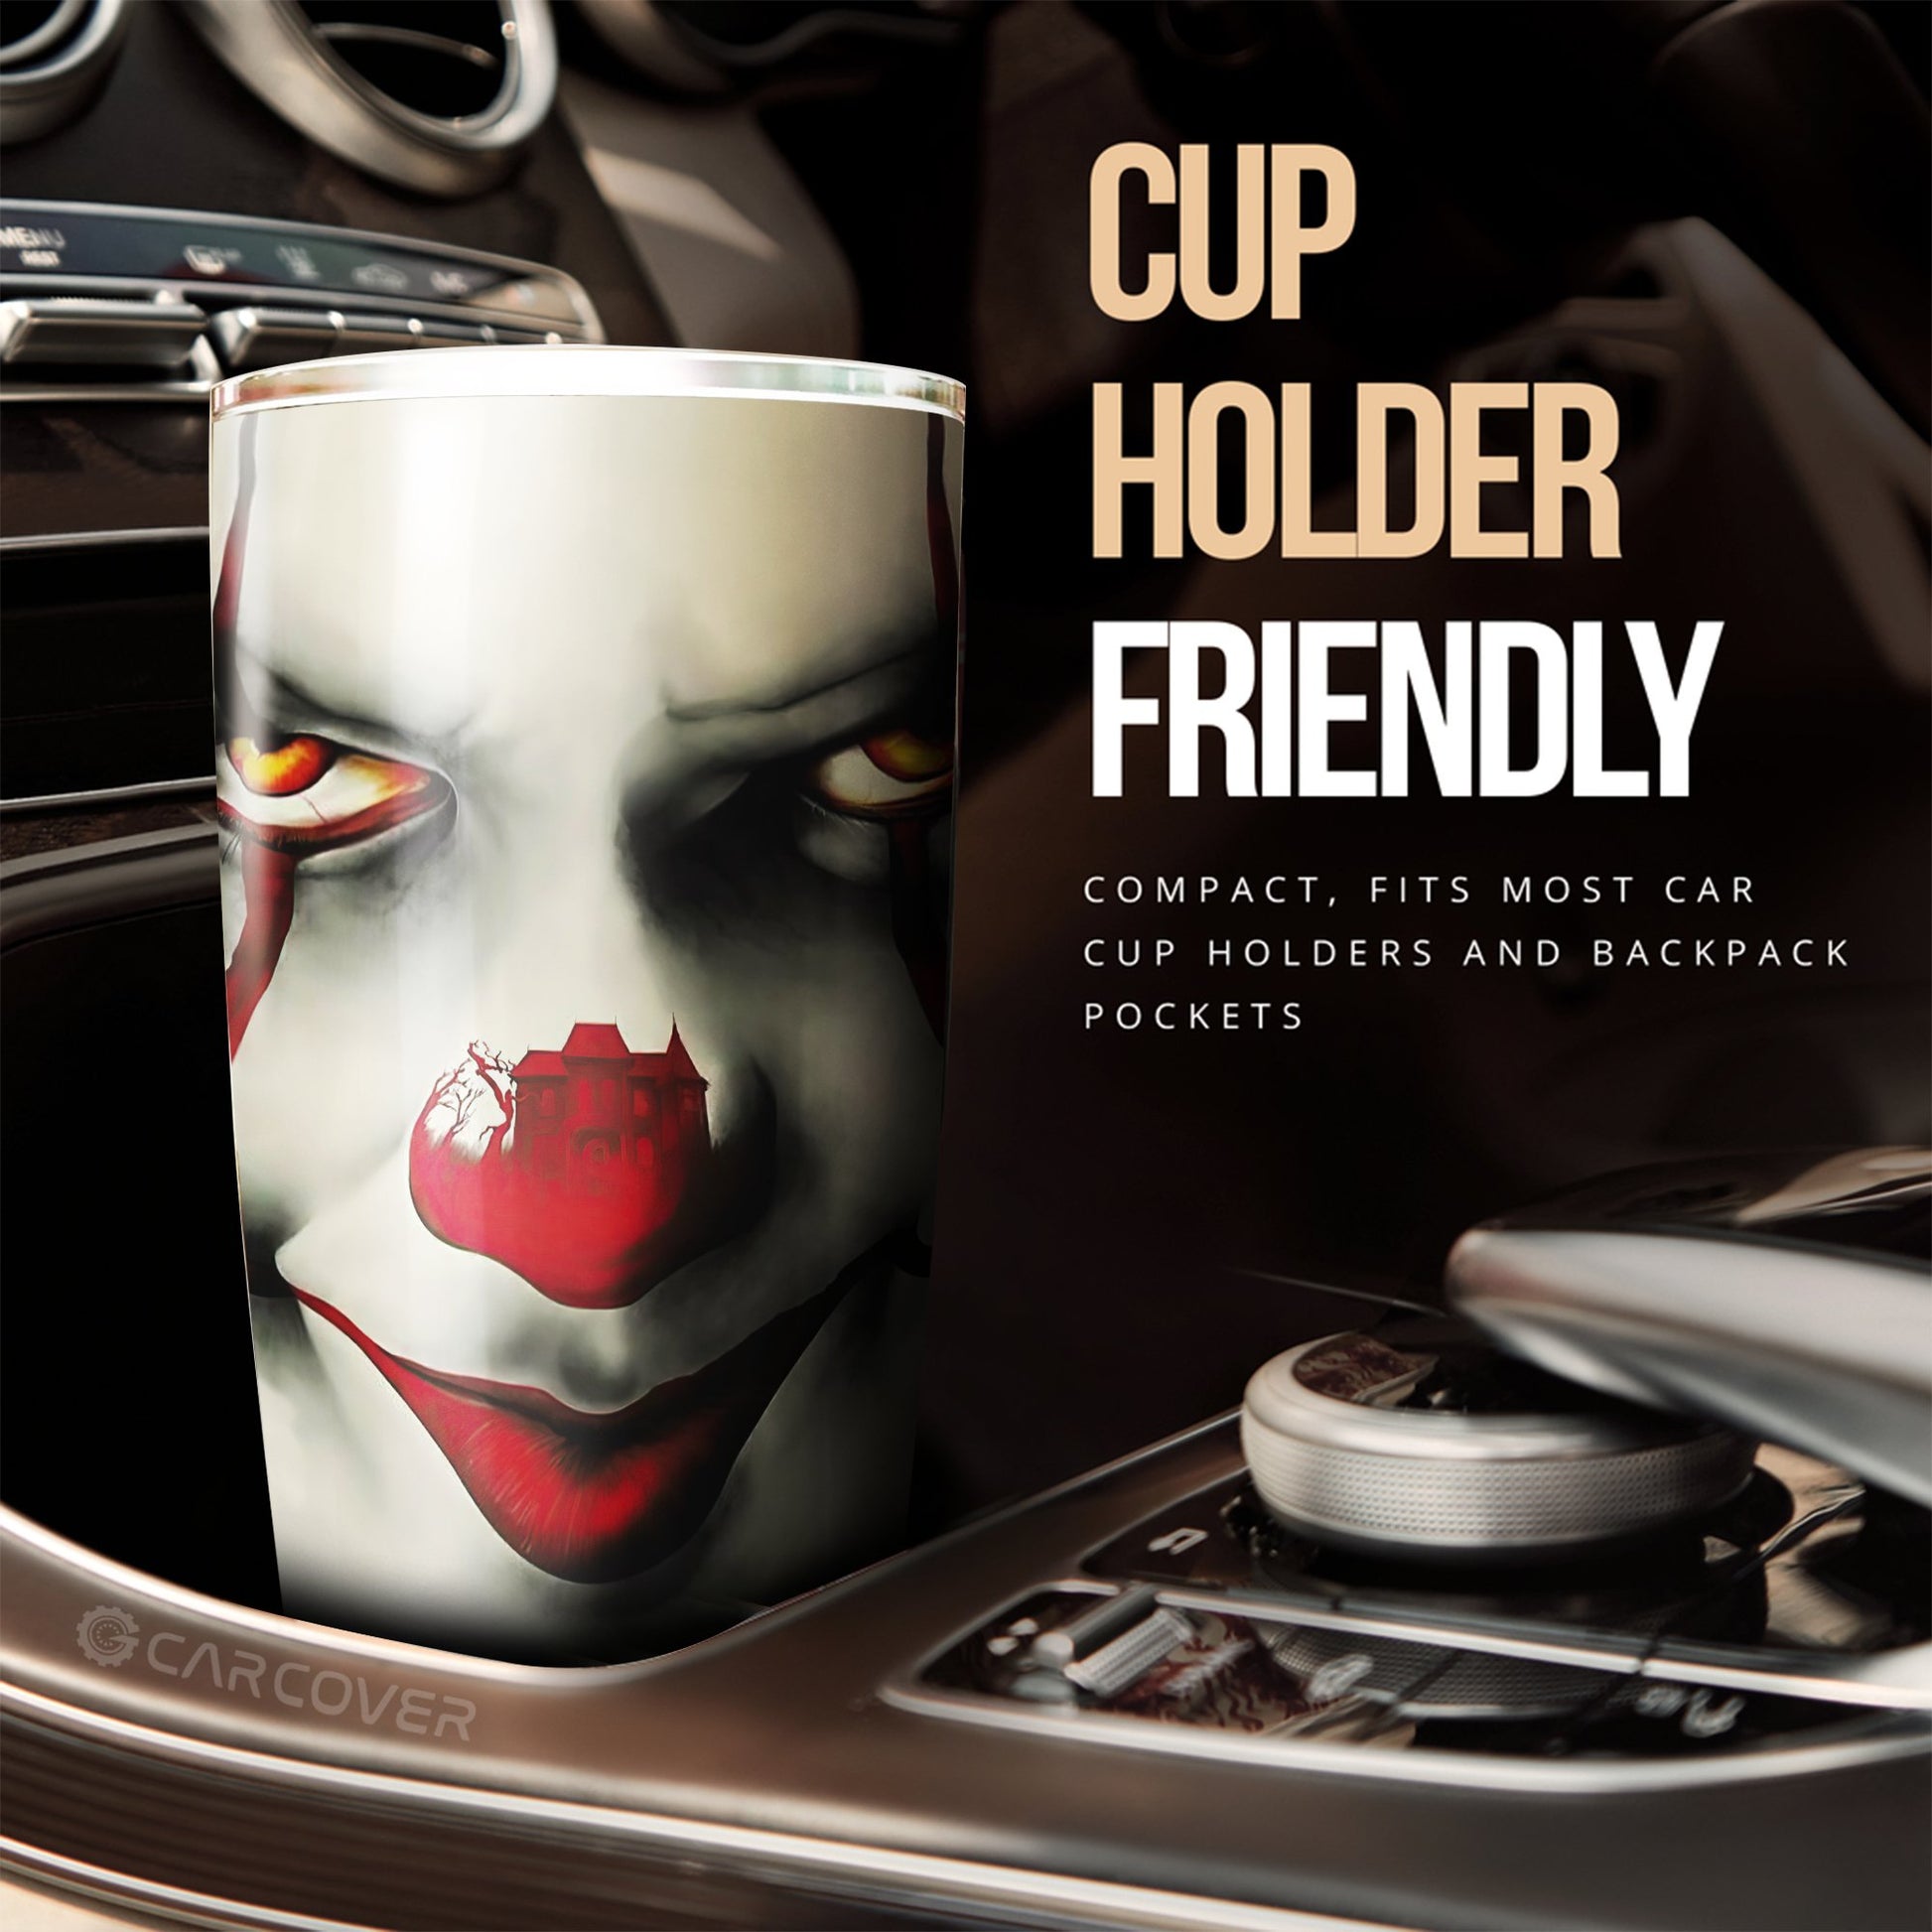 Pennywise Tumbler Cup Custom IT Clown Face Car Accessories Horror Halloween Decorations - Gearcarcover - 2